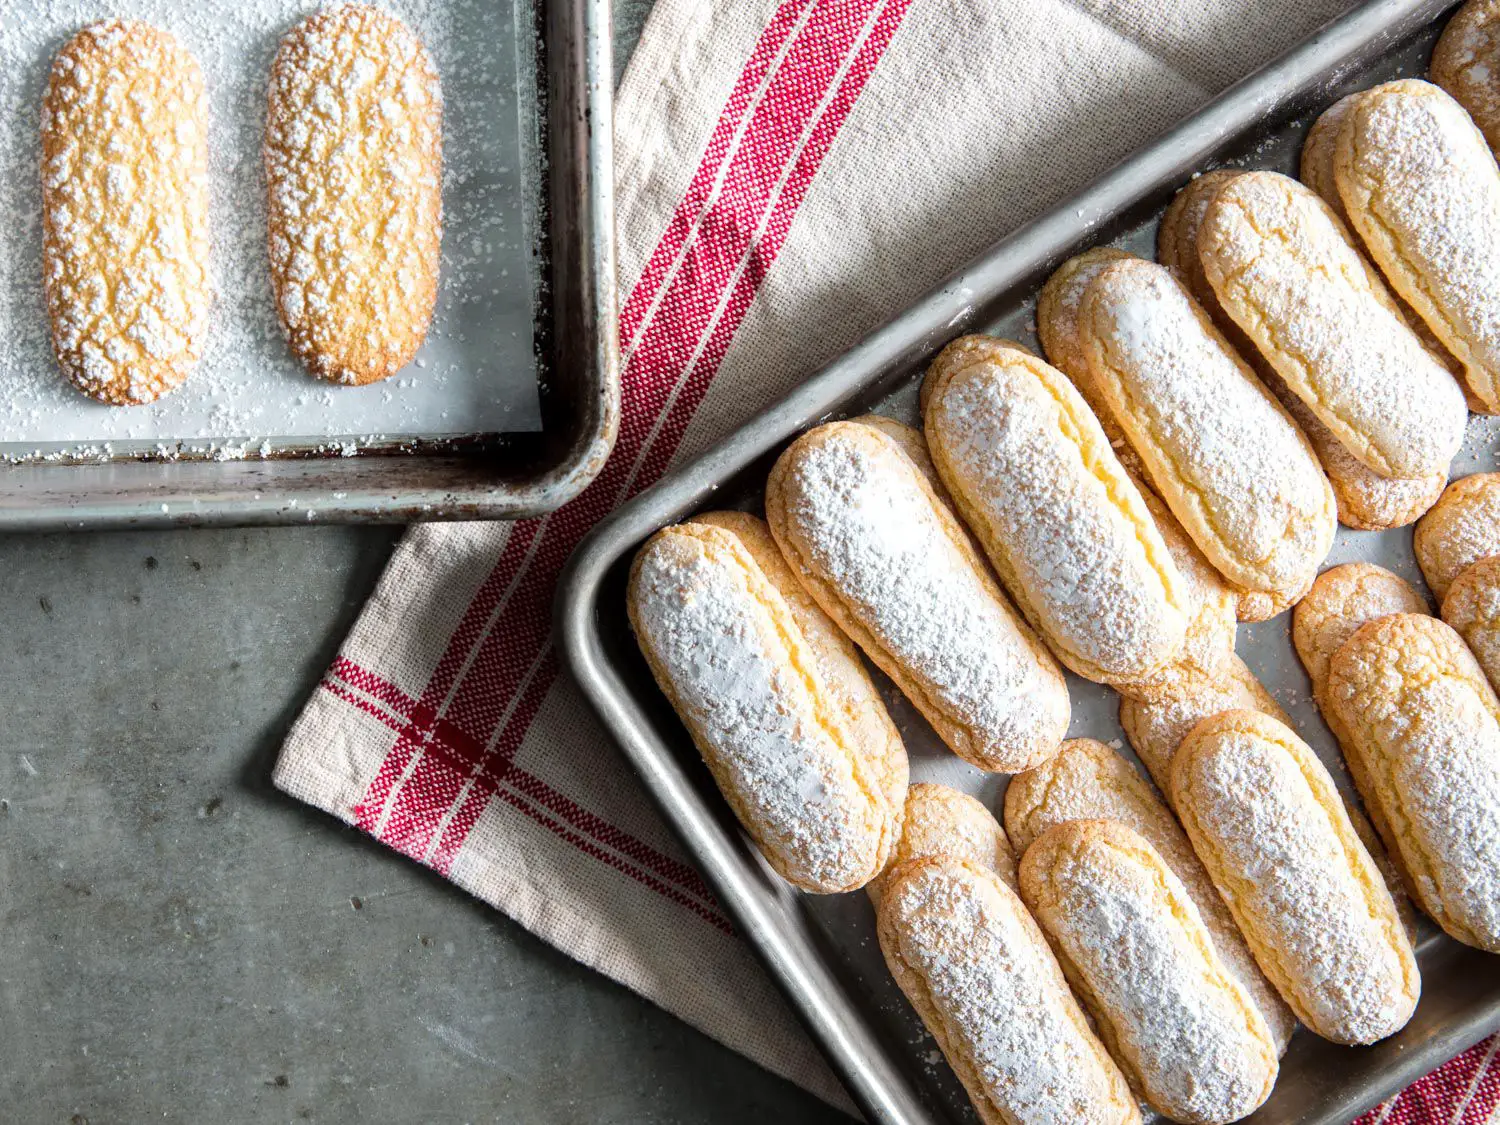 Where To Find Ladyfingers In The Grocery Store?